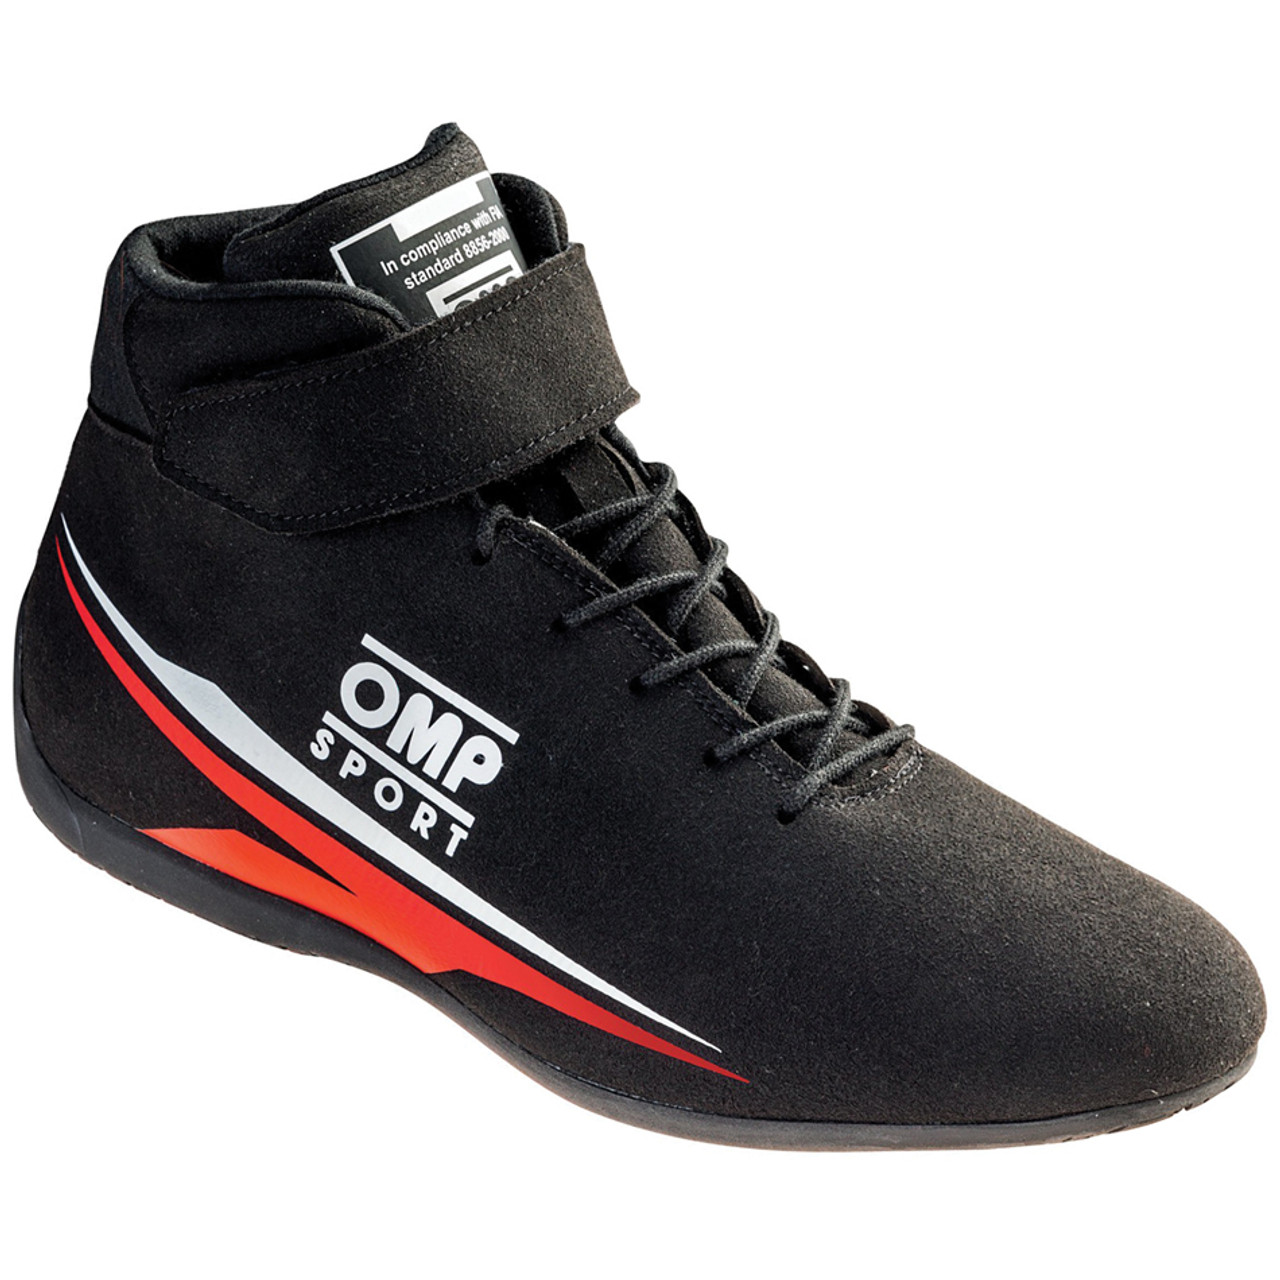 OMP Sport Shoes MY 2018 Black Size 42 US 8 OMPIC81607142